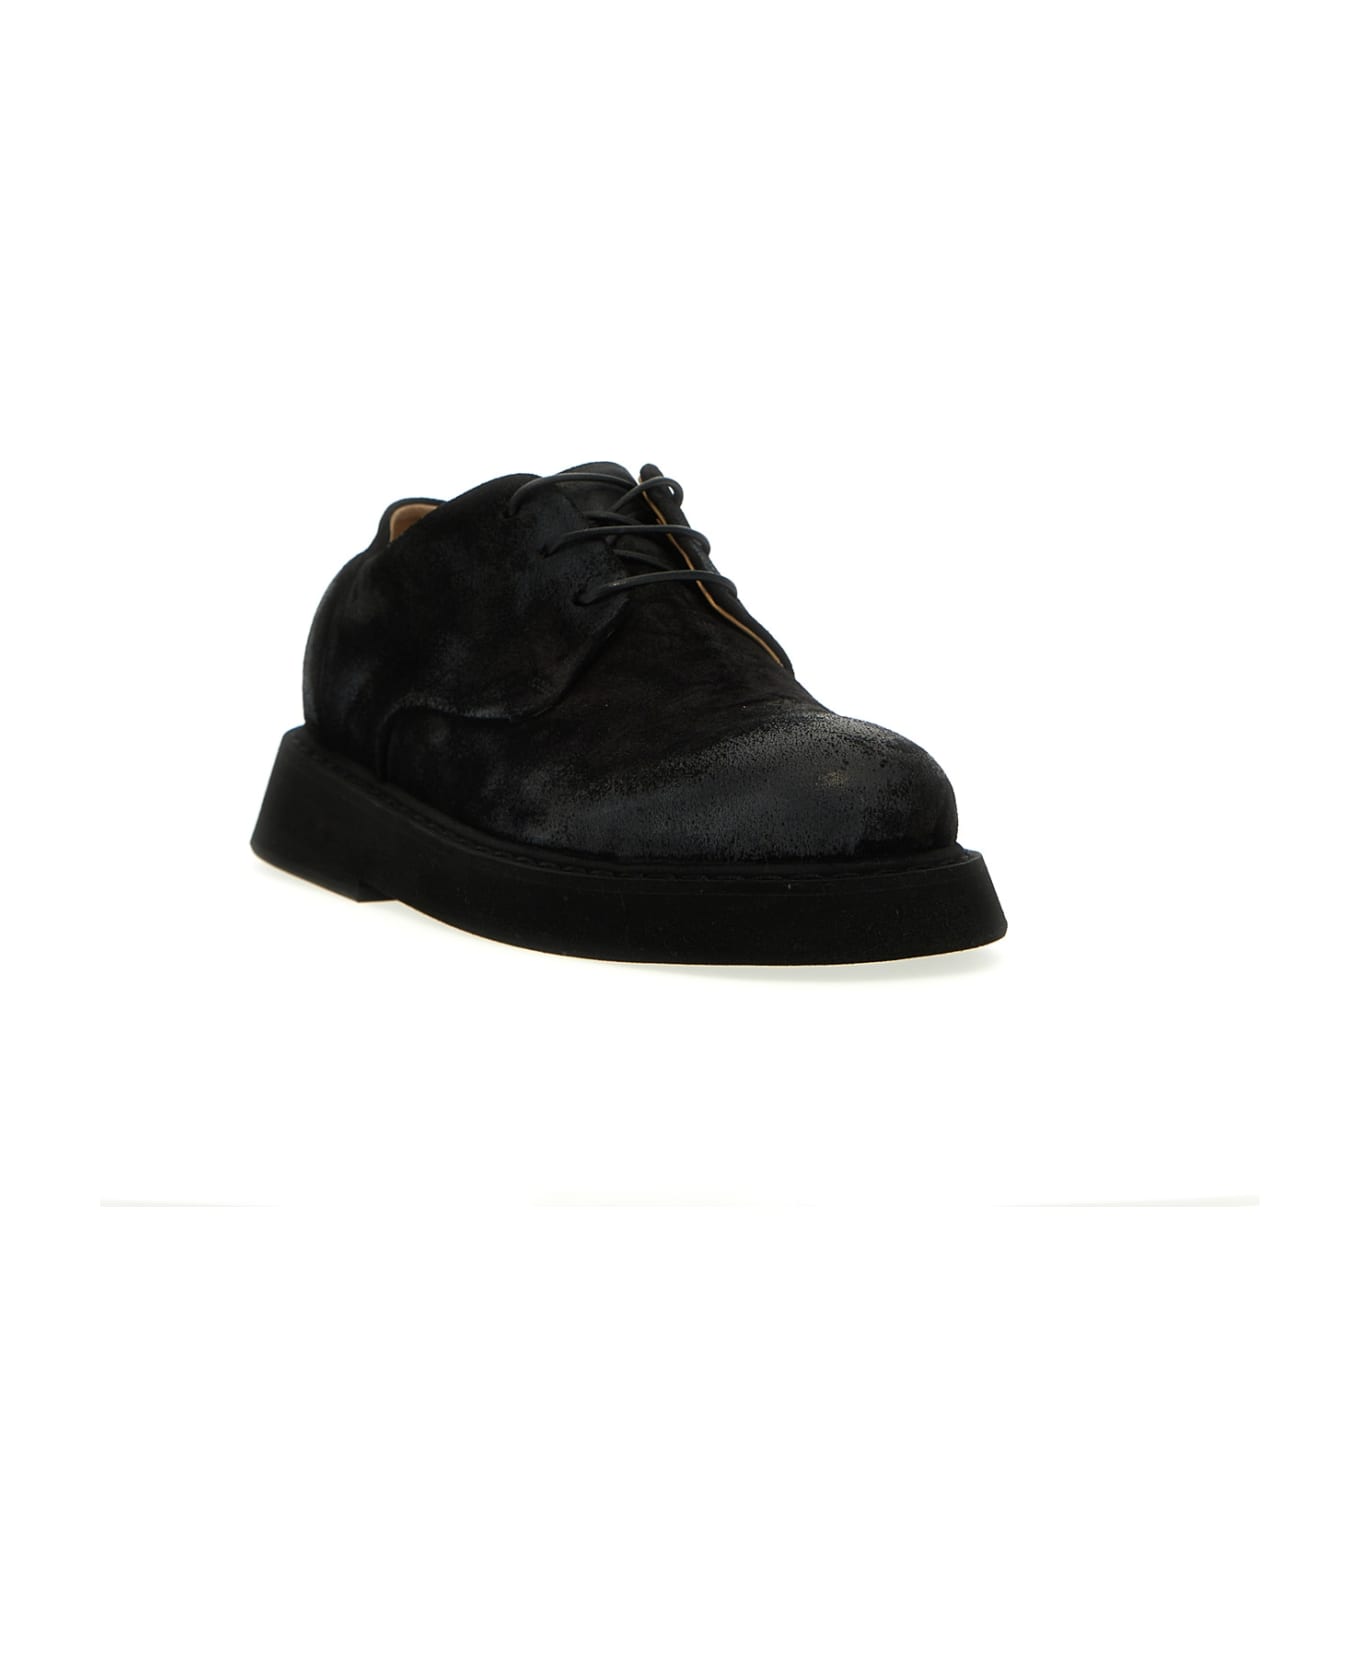 Marsell 'spalla' Lace Up Shoes - Black  